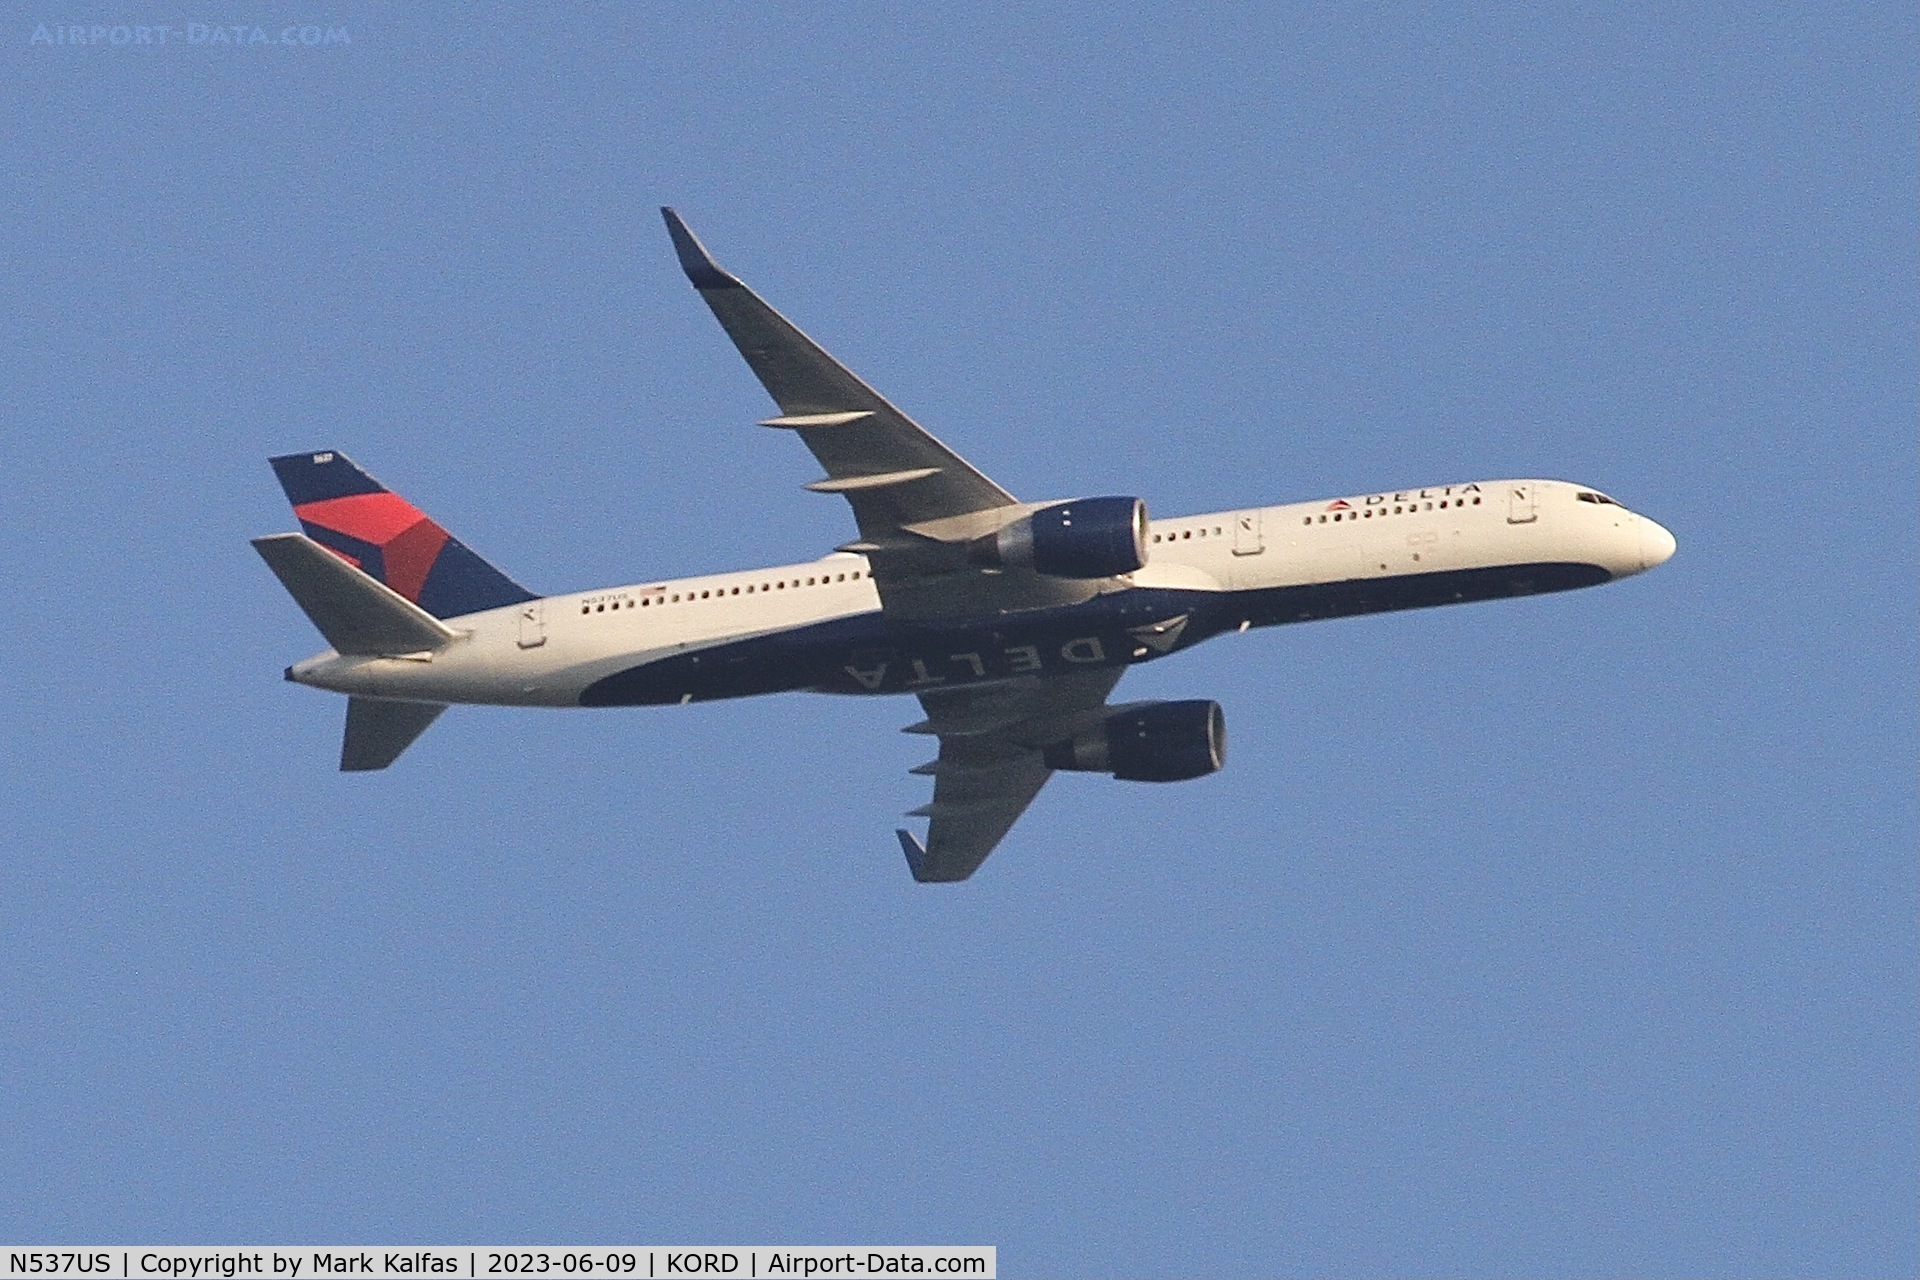 N537US, 1996 Boeing 757-251 C/N 26484, Delta Airlines B752 N537UA operating as DL2879 from ATL to ORD